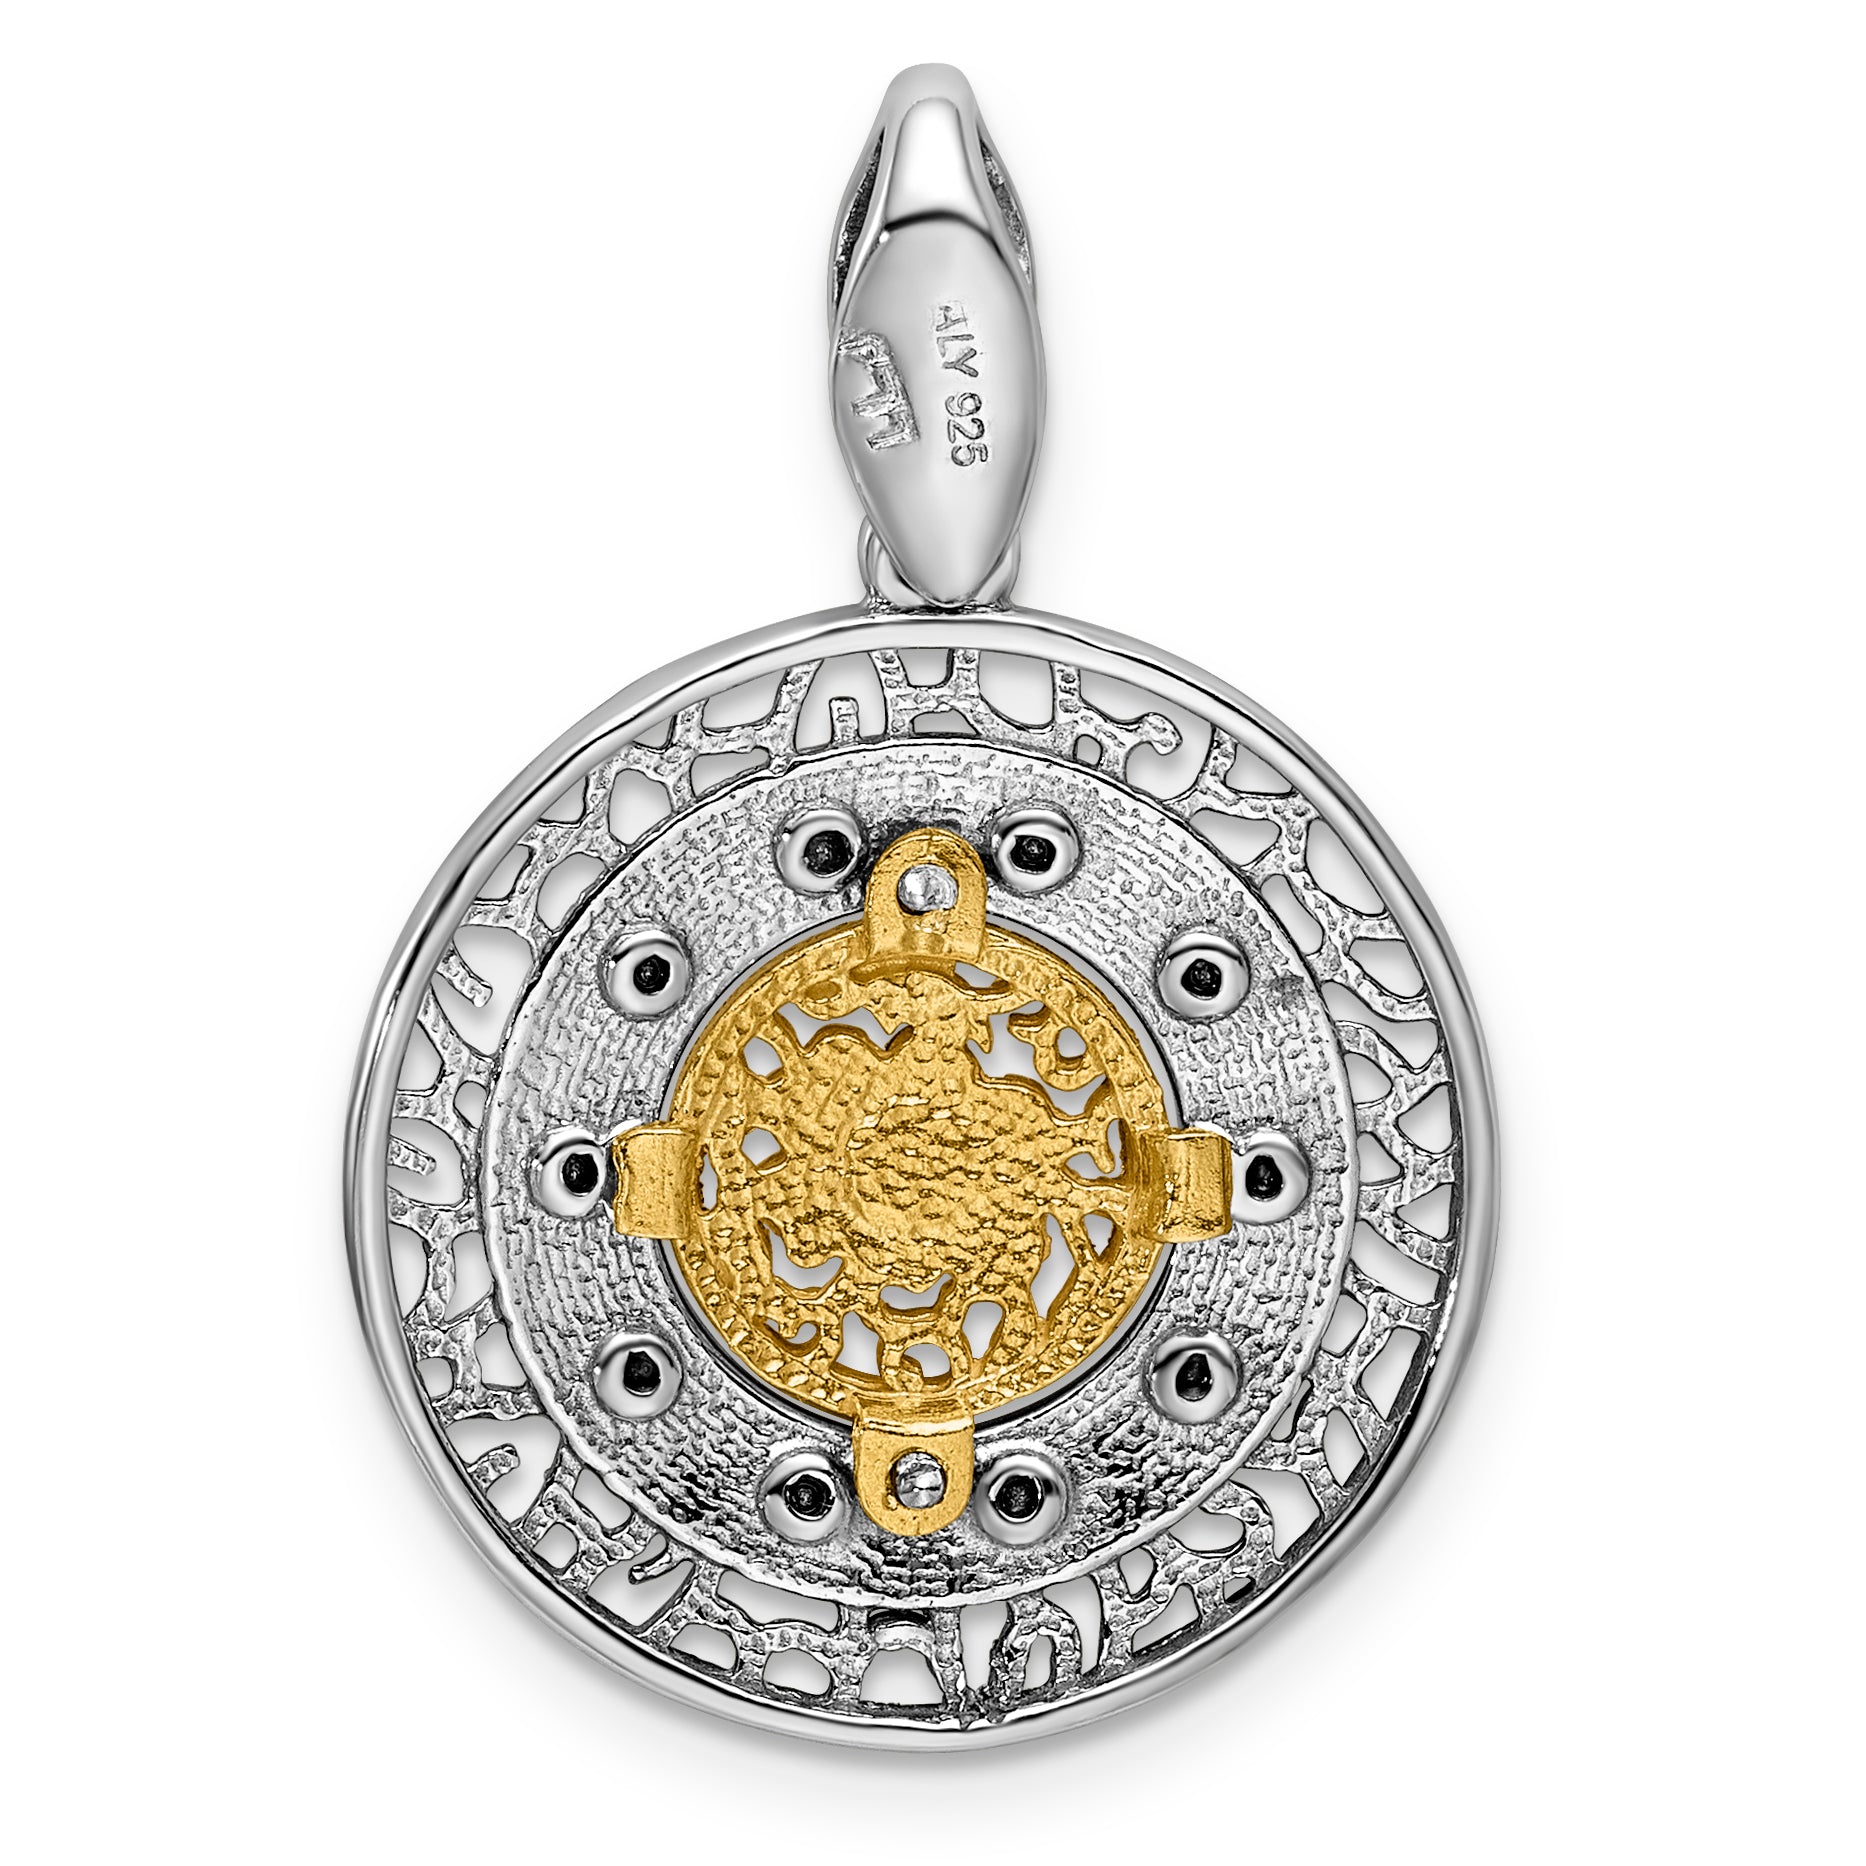 Sterling Silver Rhod-plated Gold-tone Crystal Pendant